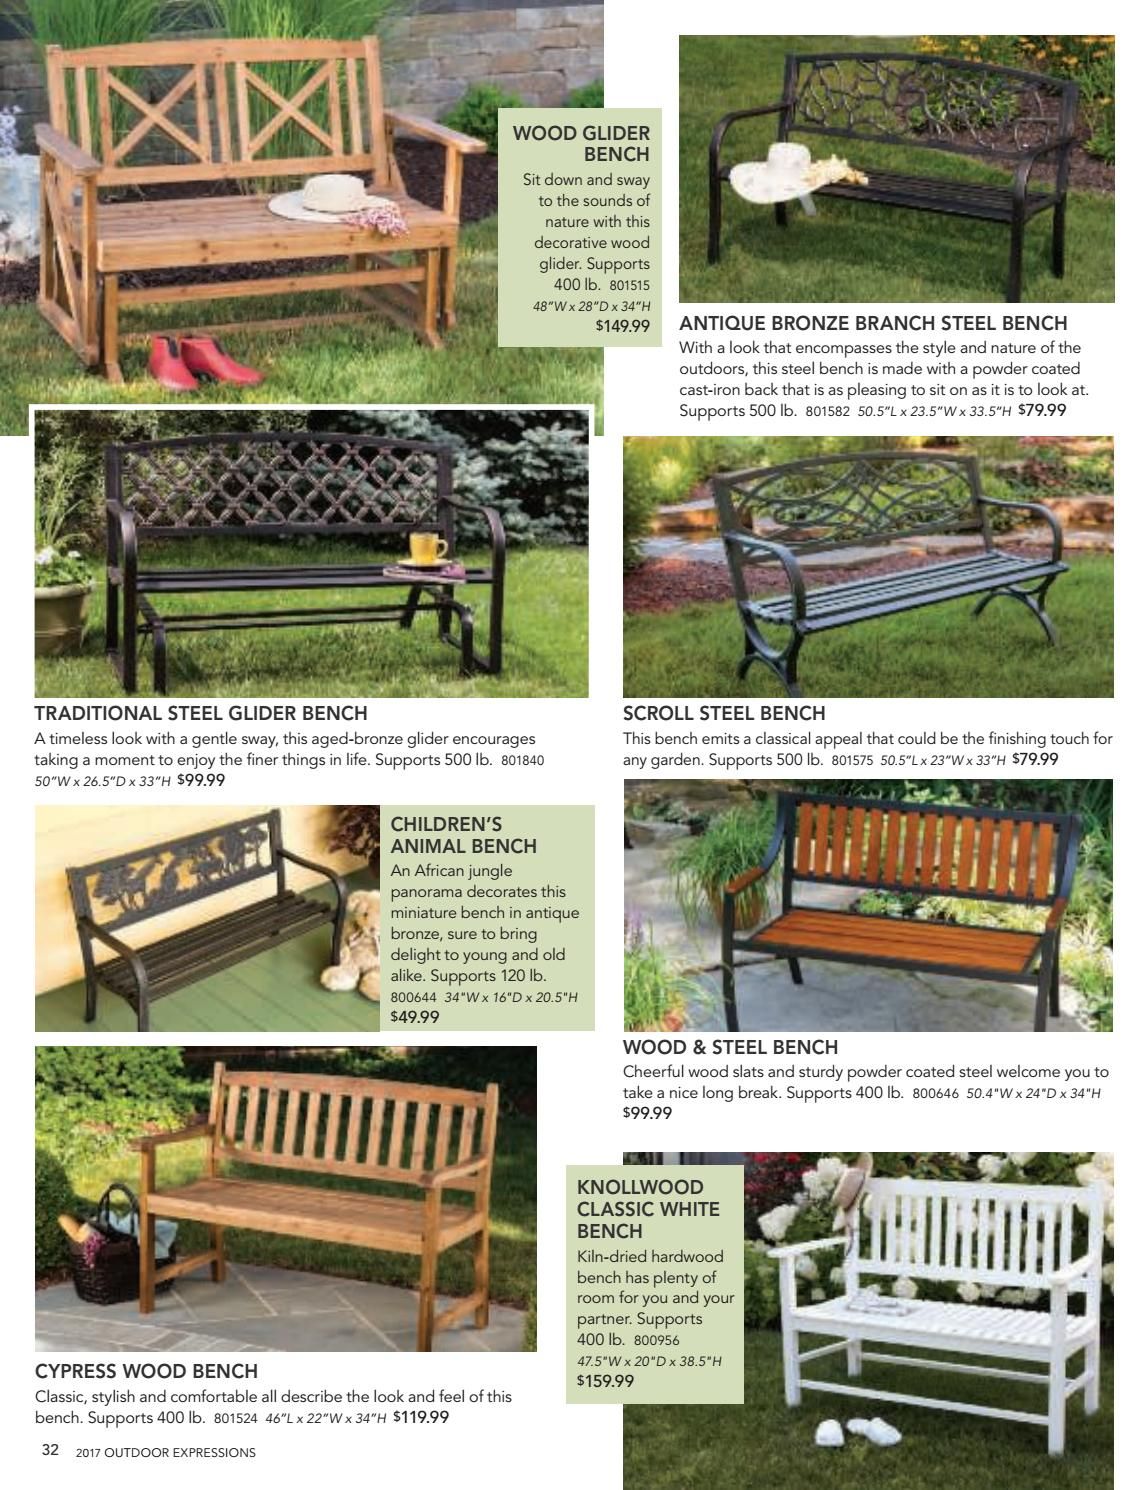 2017 Outdoor Expressions Catalogbrian Secor – Issuu Inside Traditional Glider Benches (View 17 of 25)